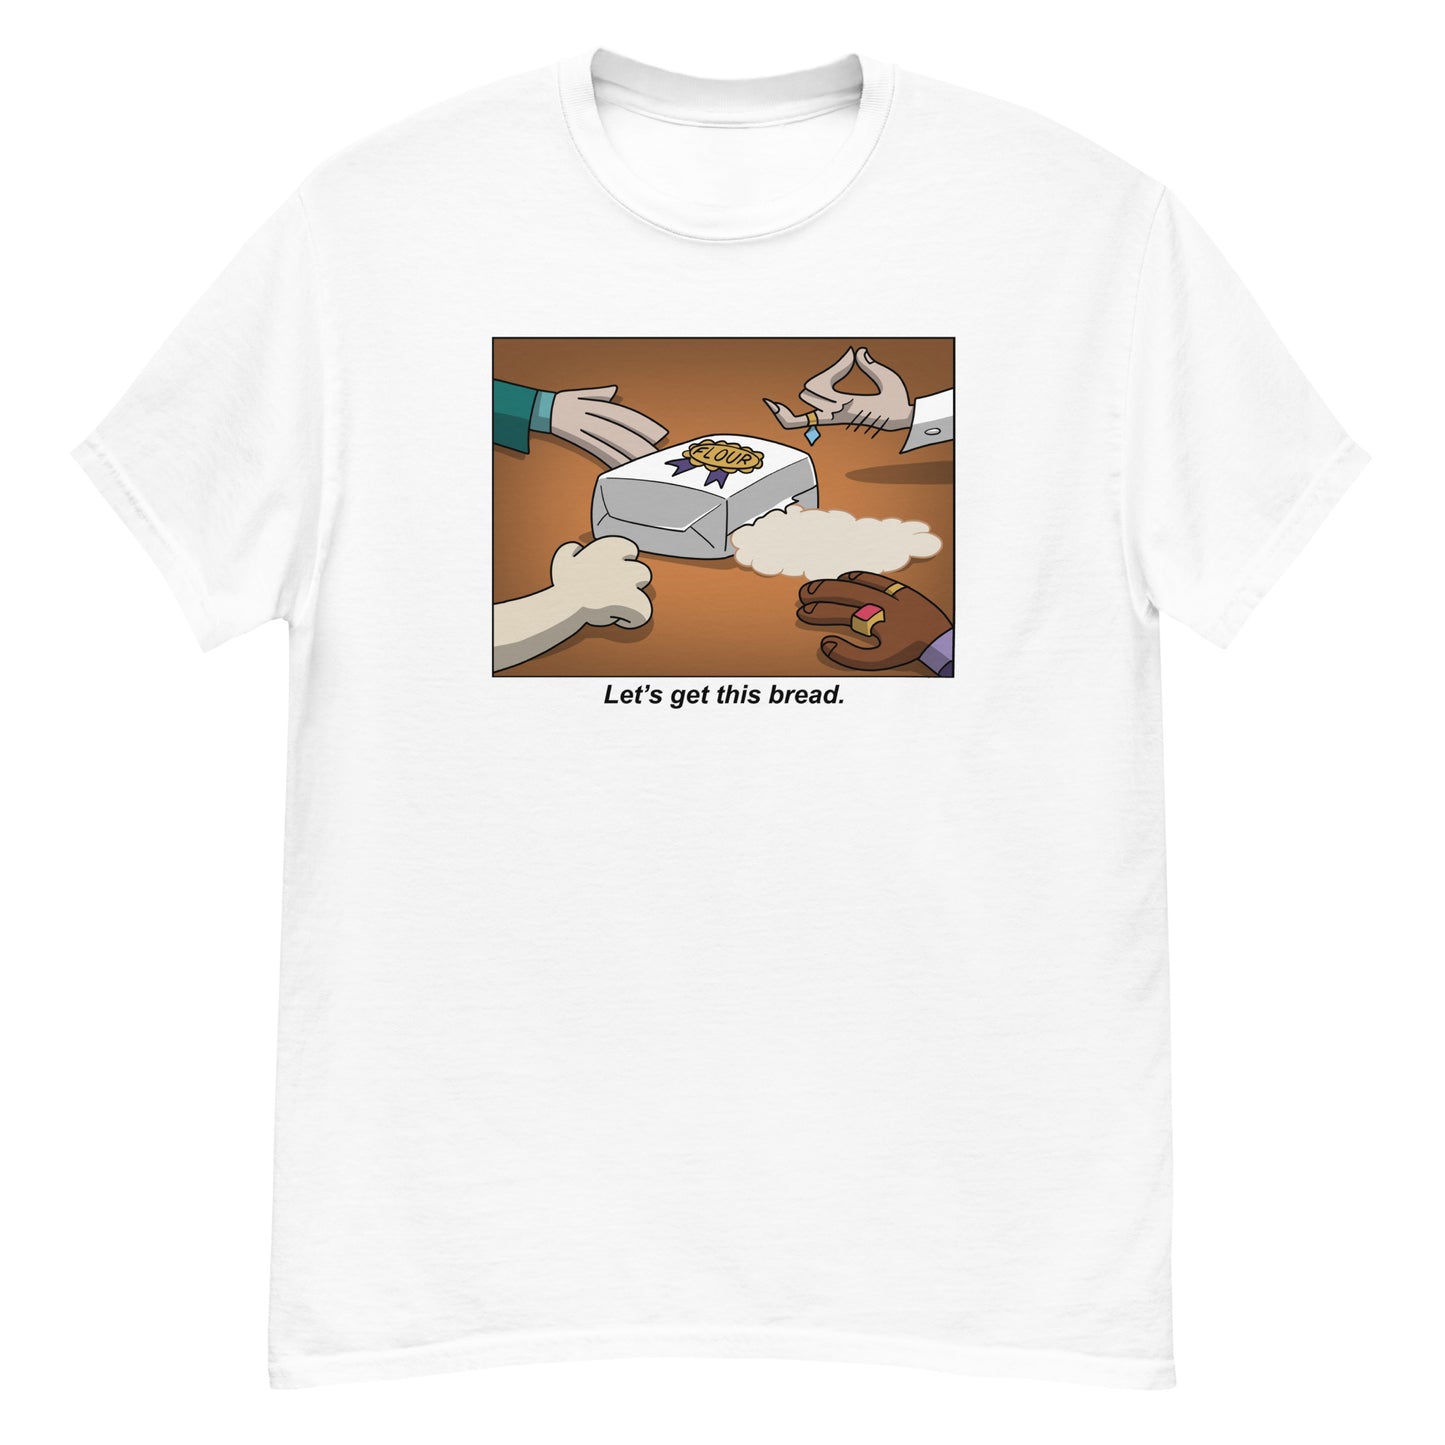 Let's Get This Bread t-shirt